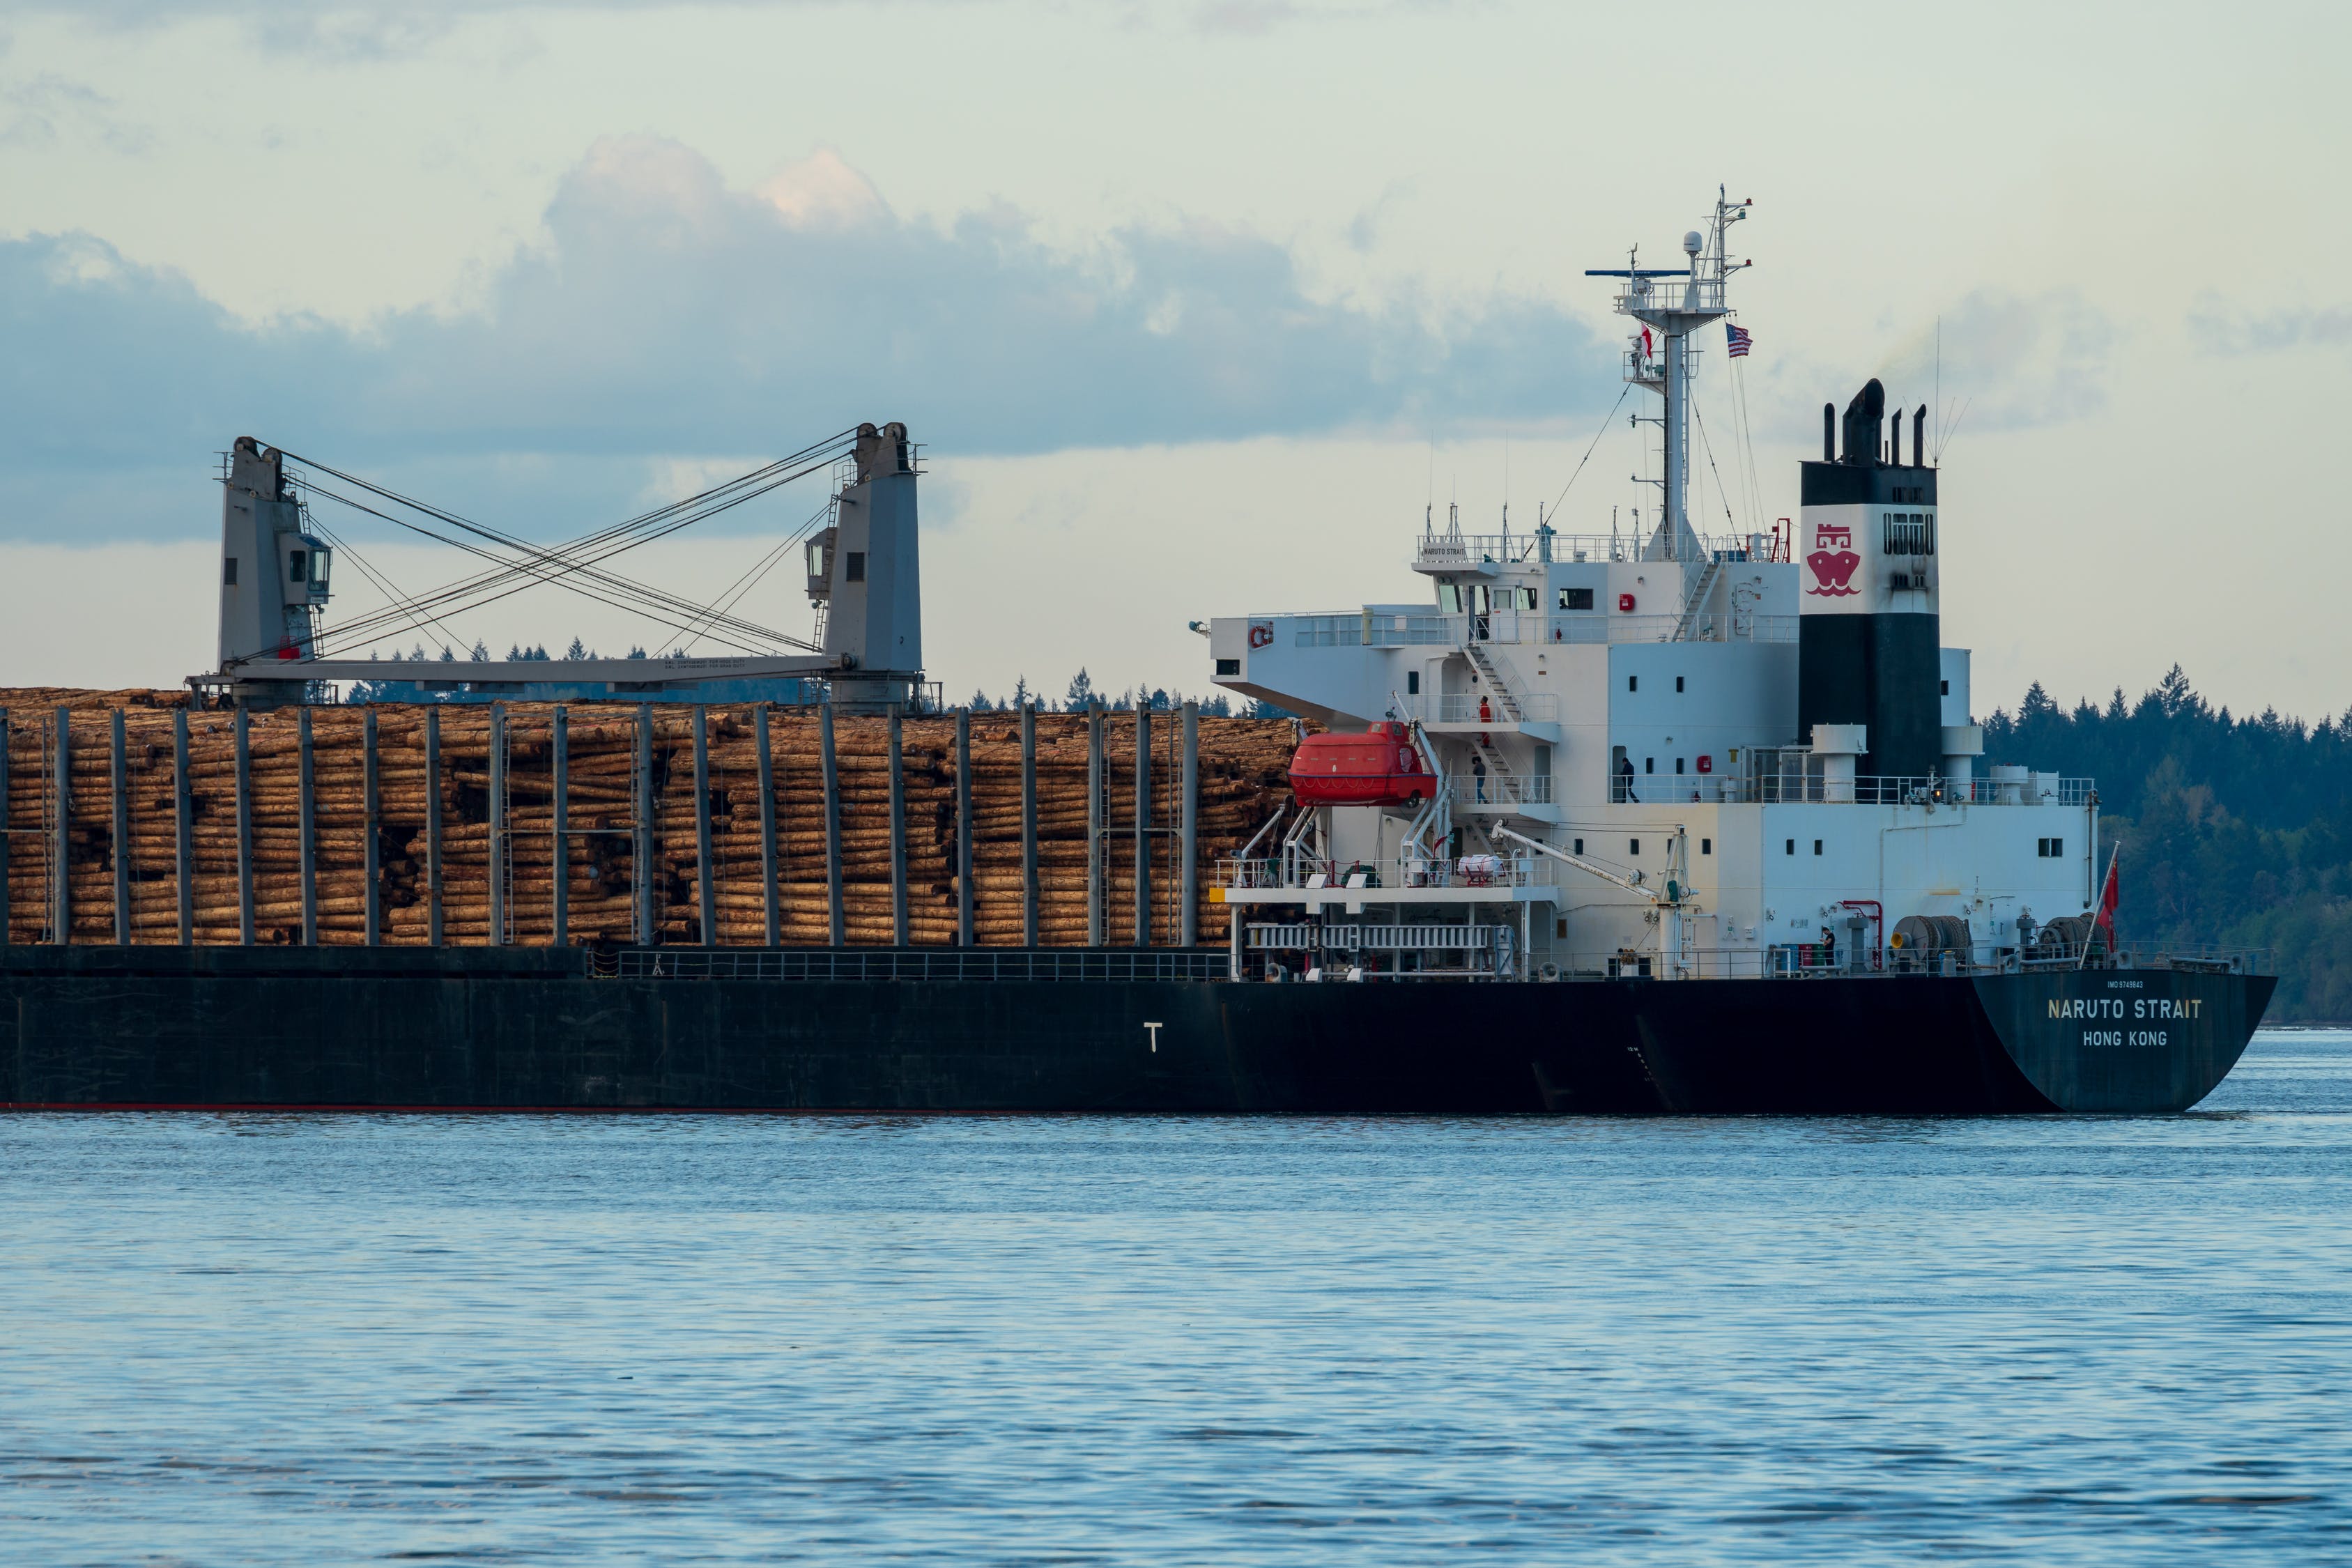 A bulk carrier with a cargo of wood